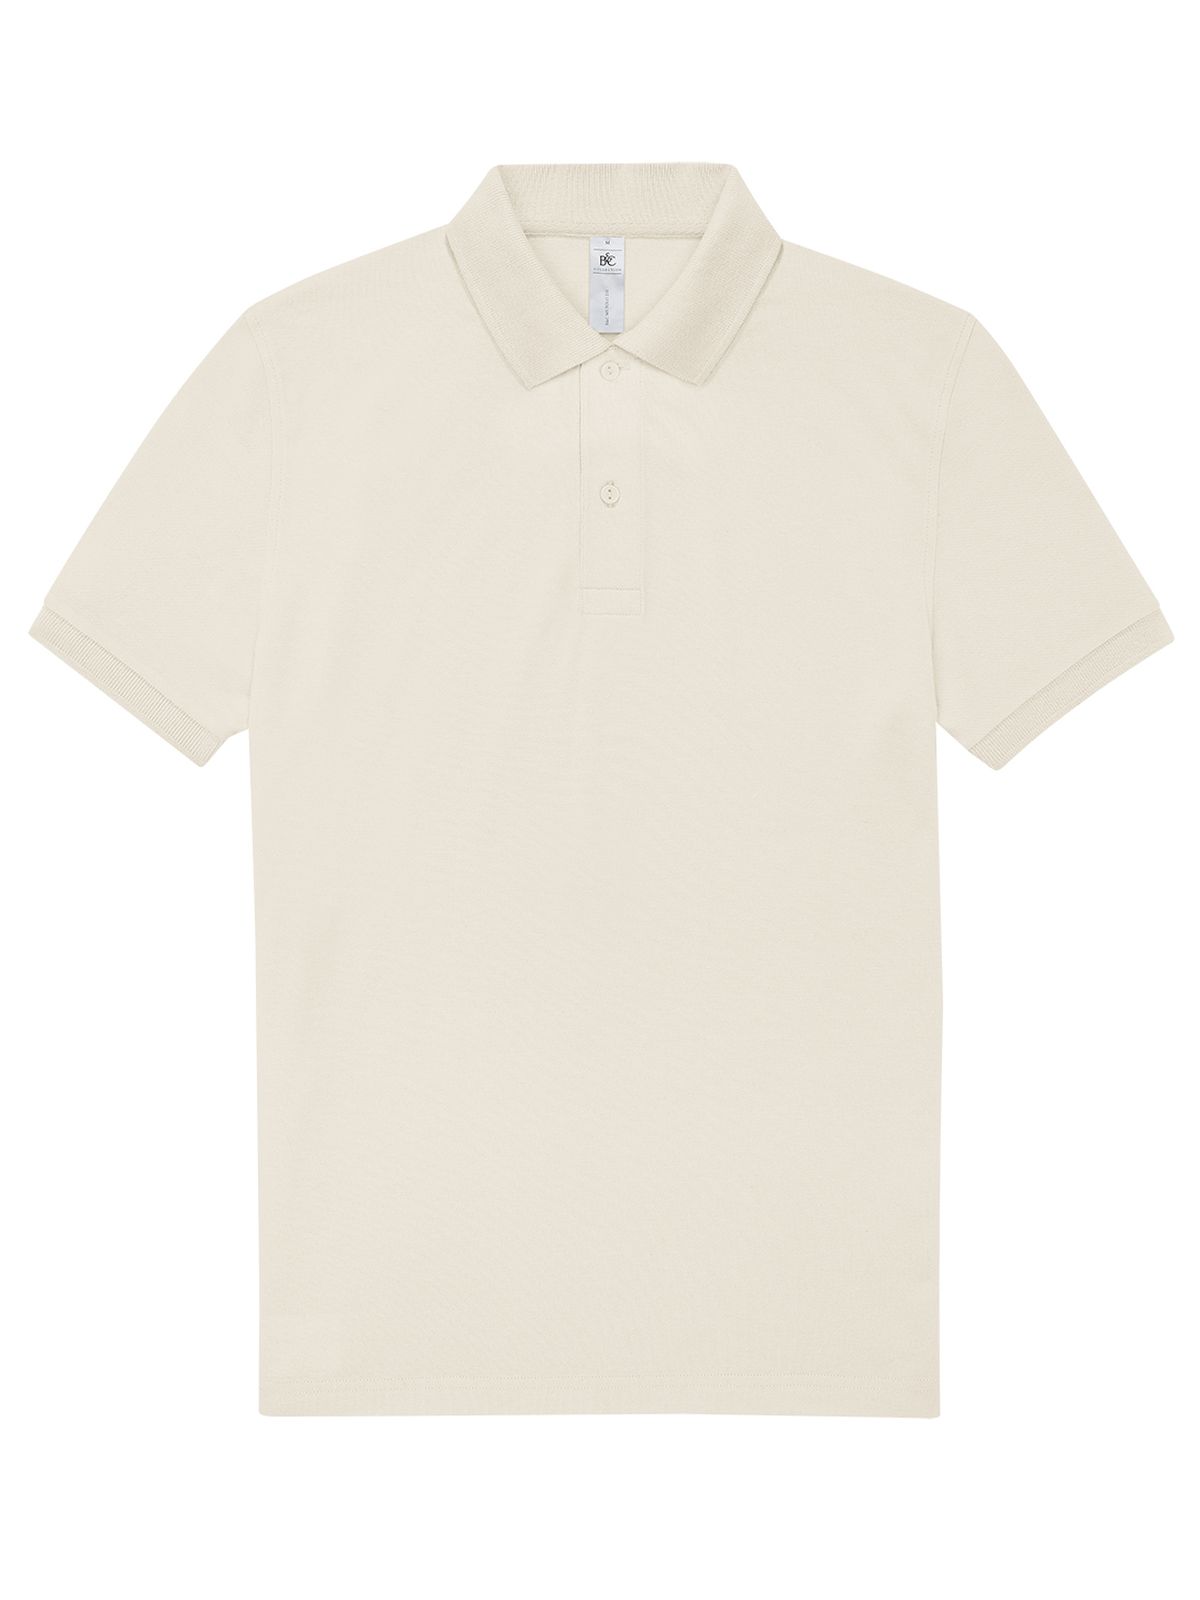 bc-my-polo-210-off-white.webp